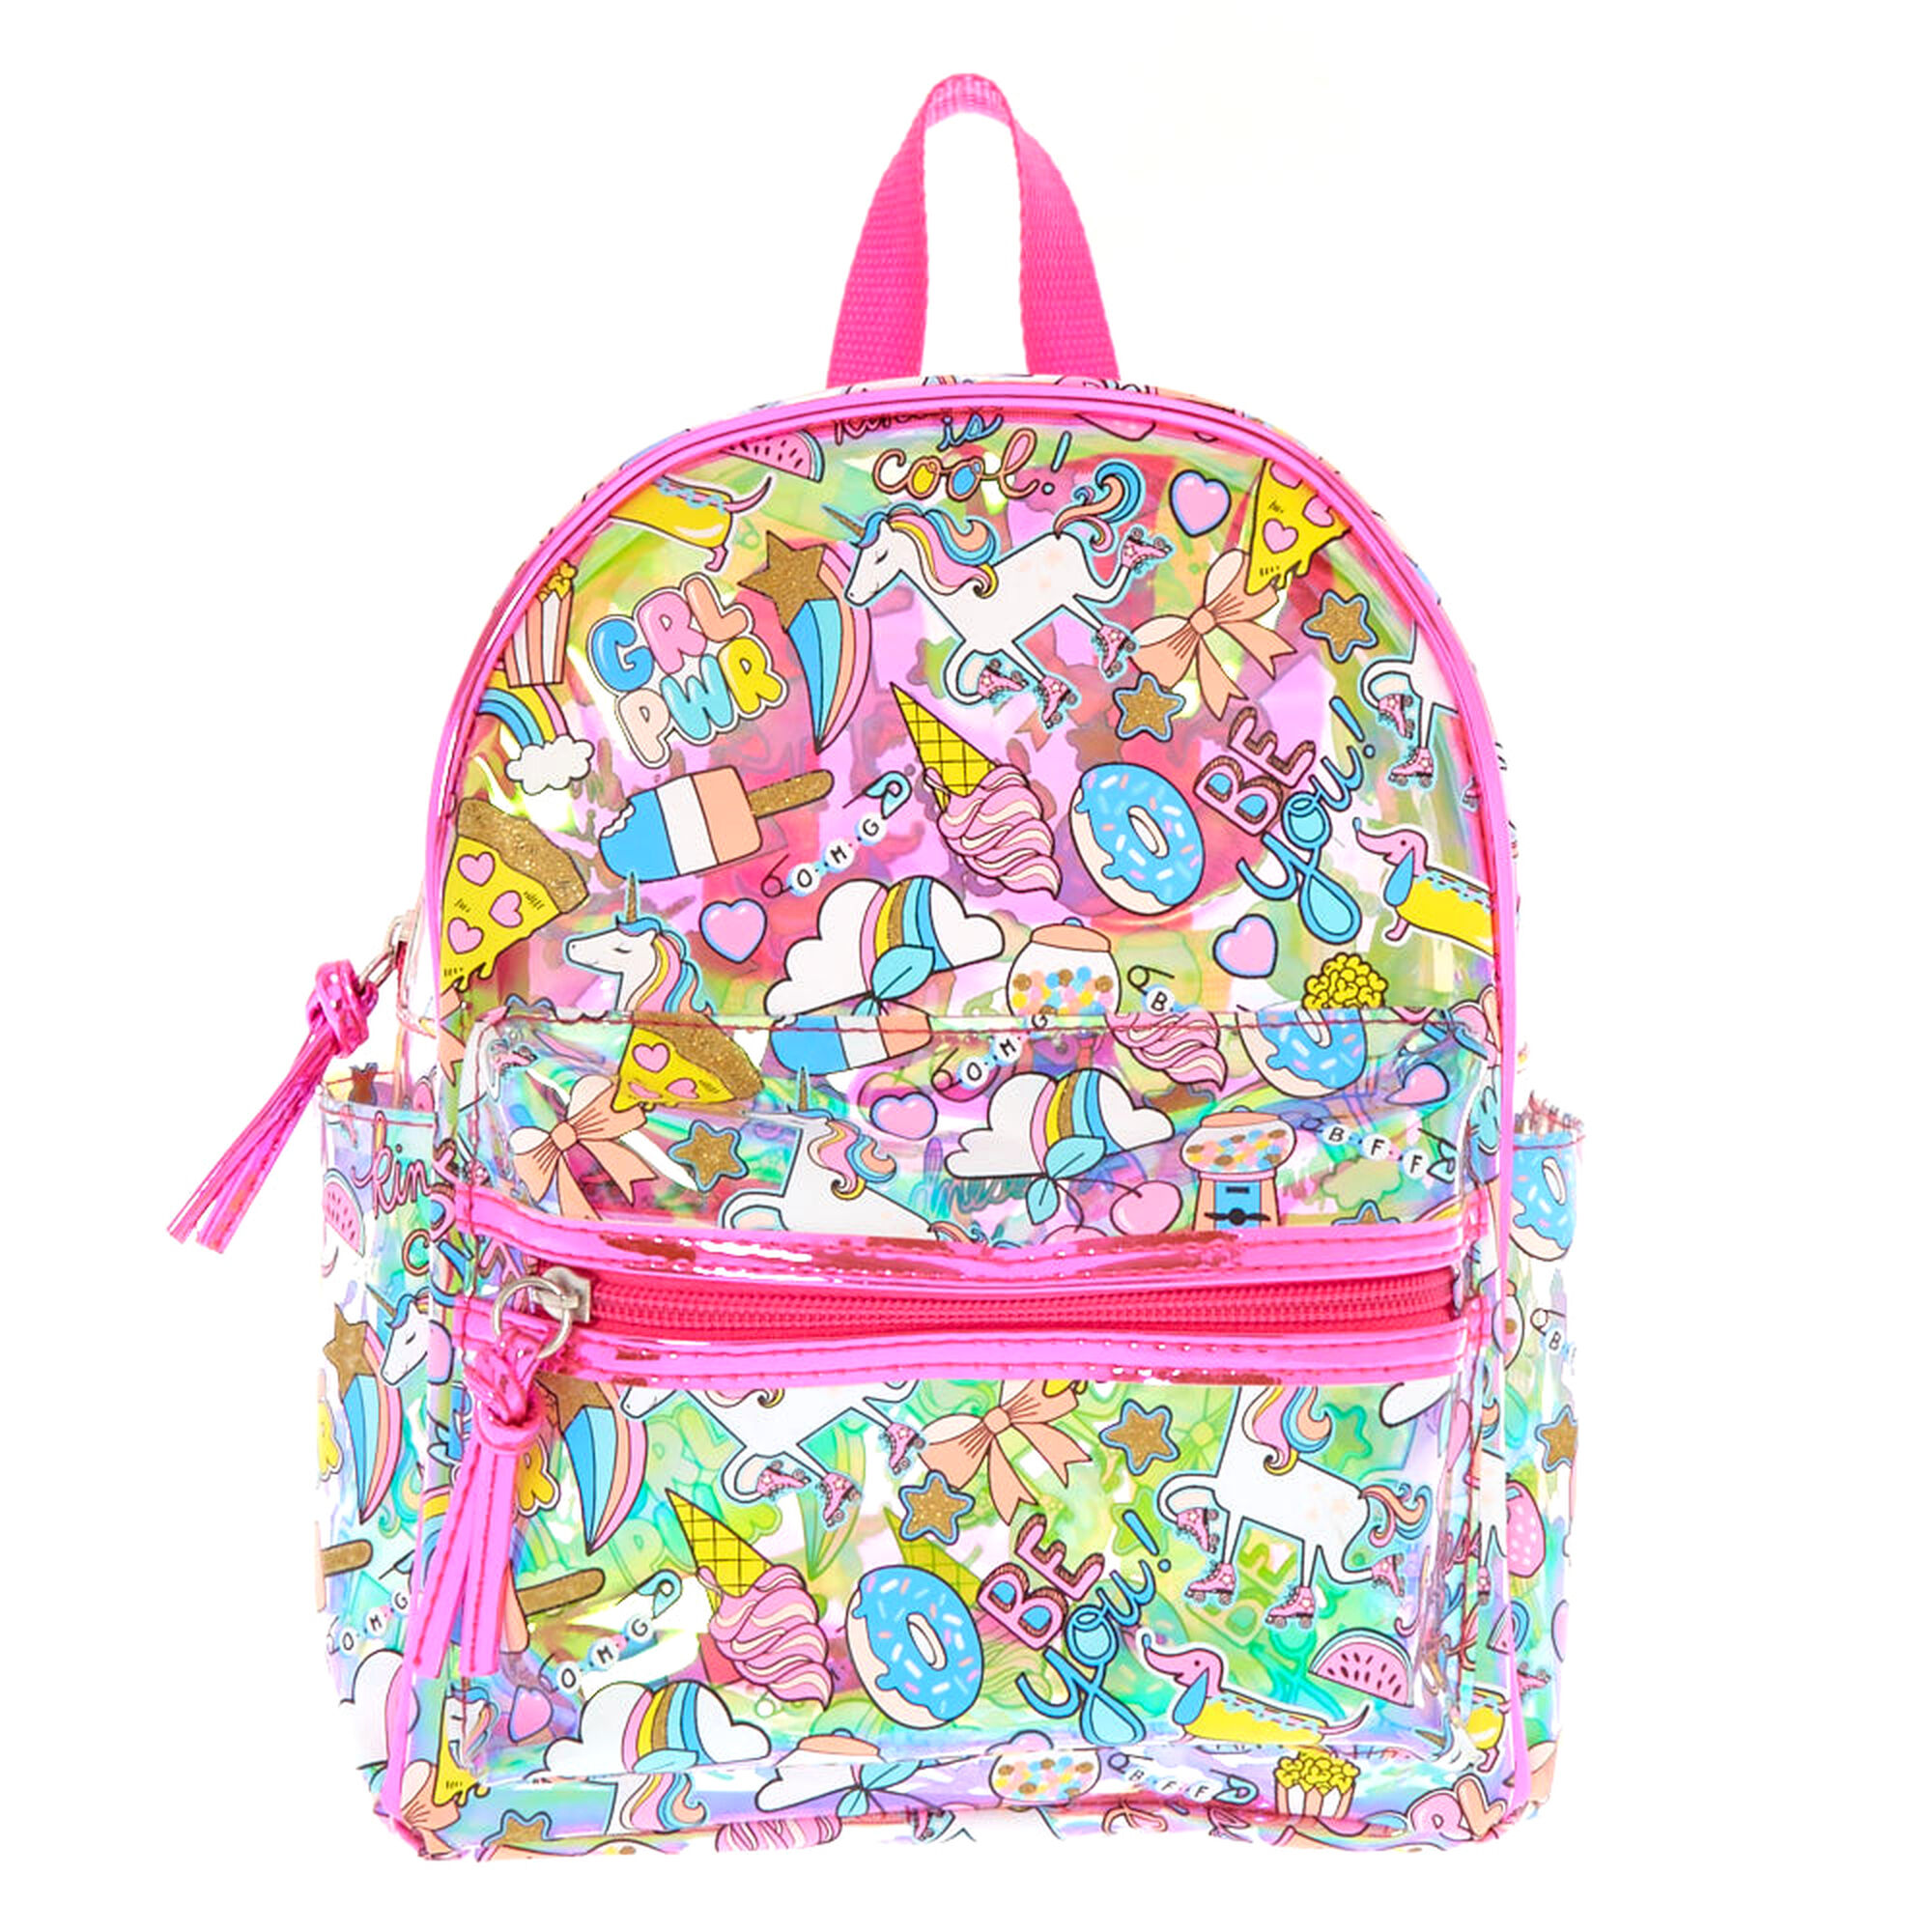 Unicorn Fun Fair Holographic Translucent Backpack | Claire's